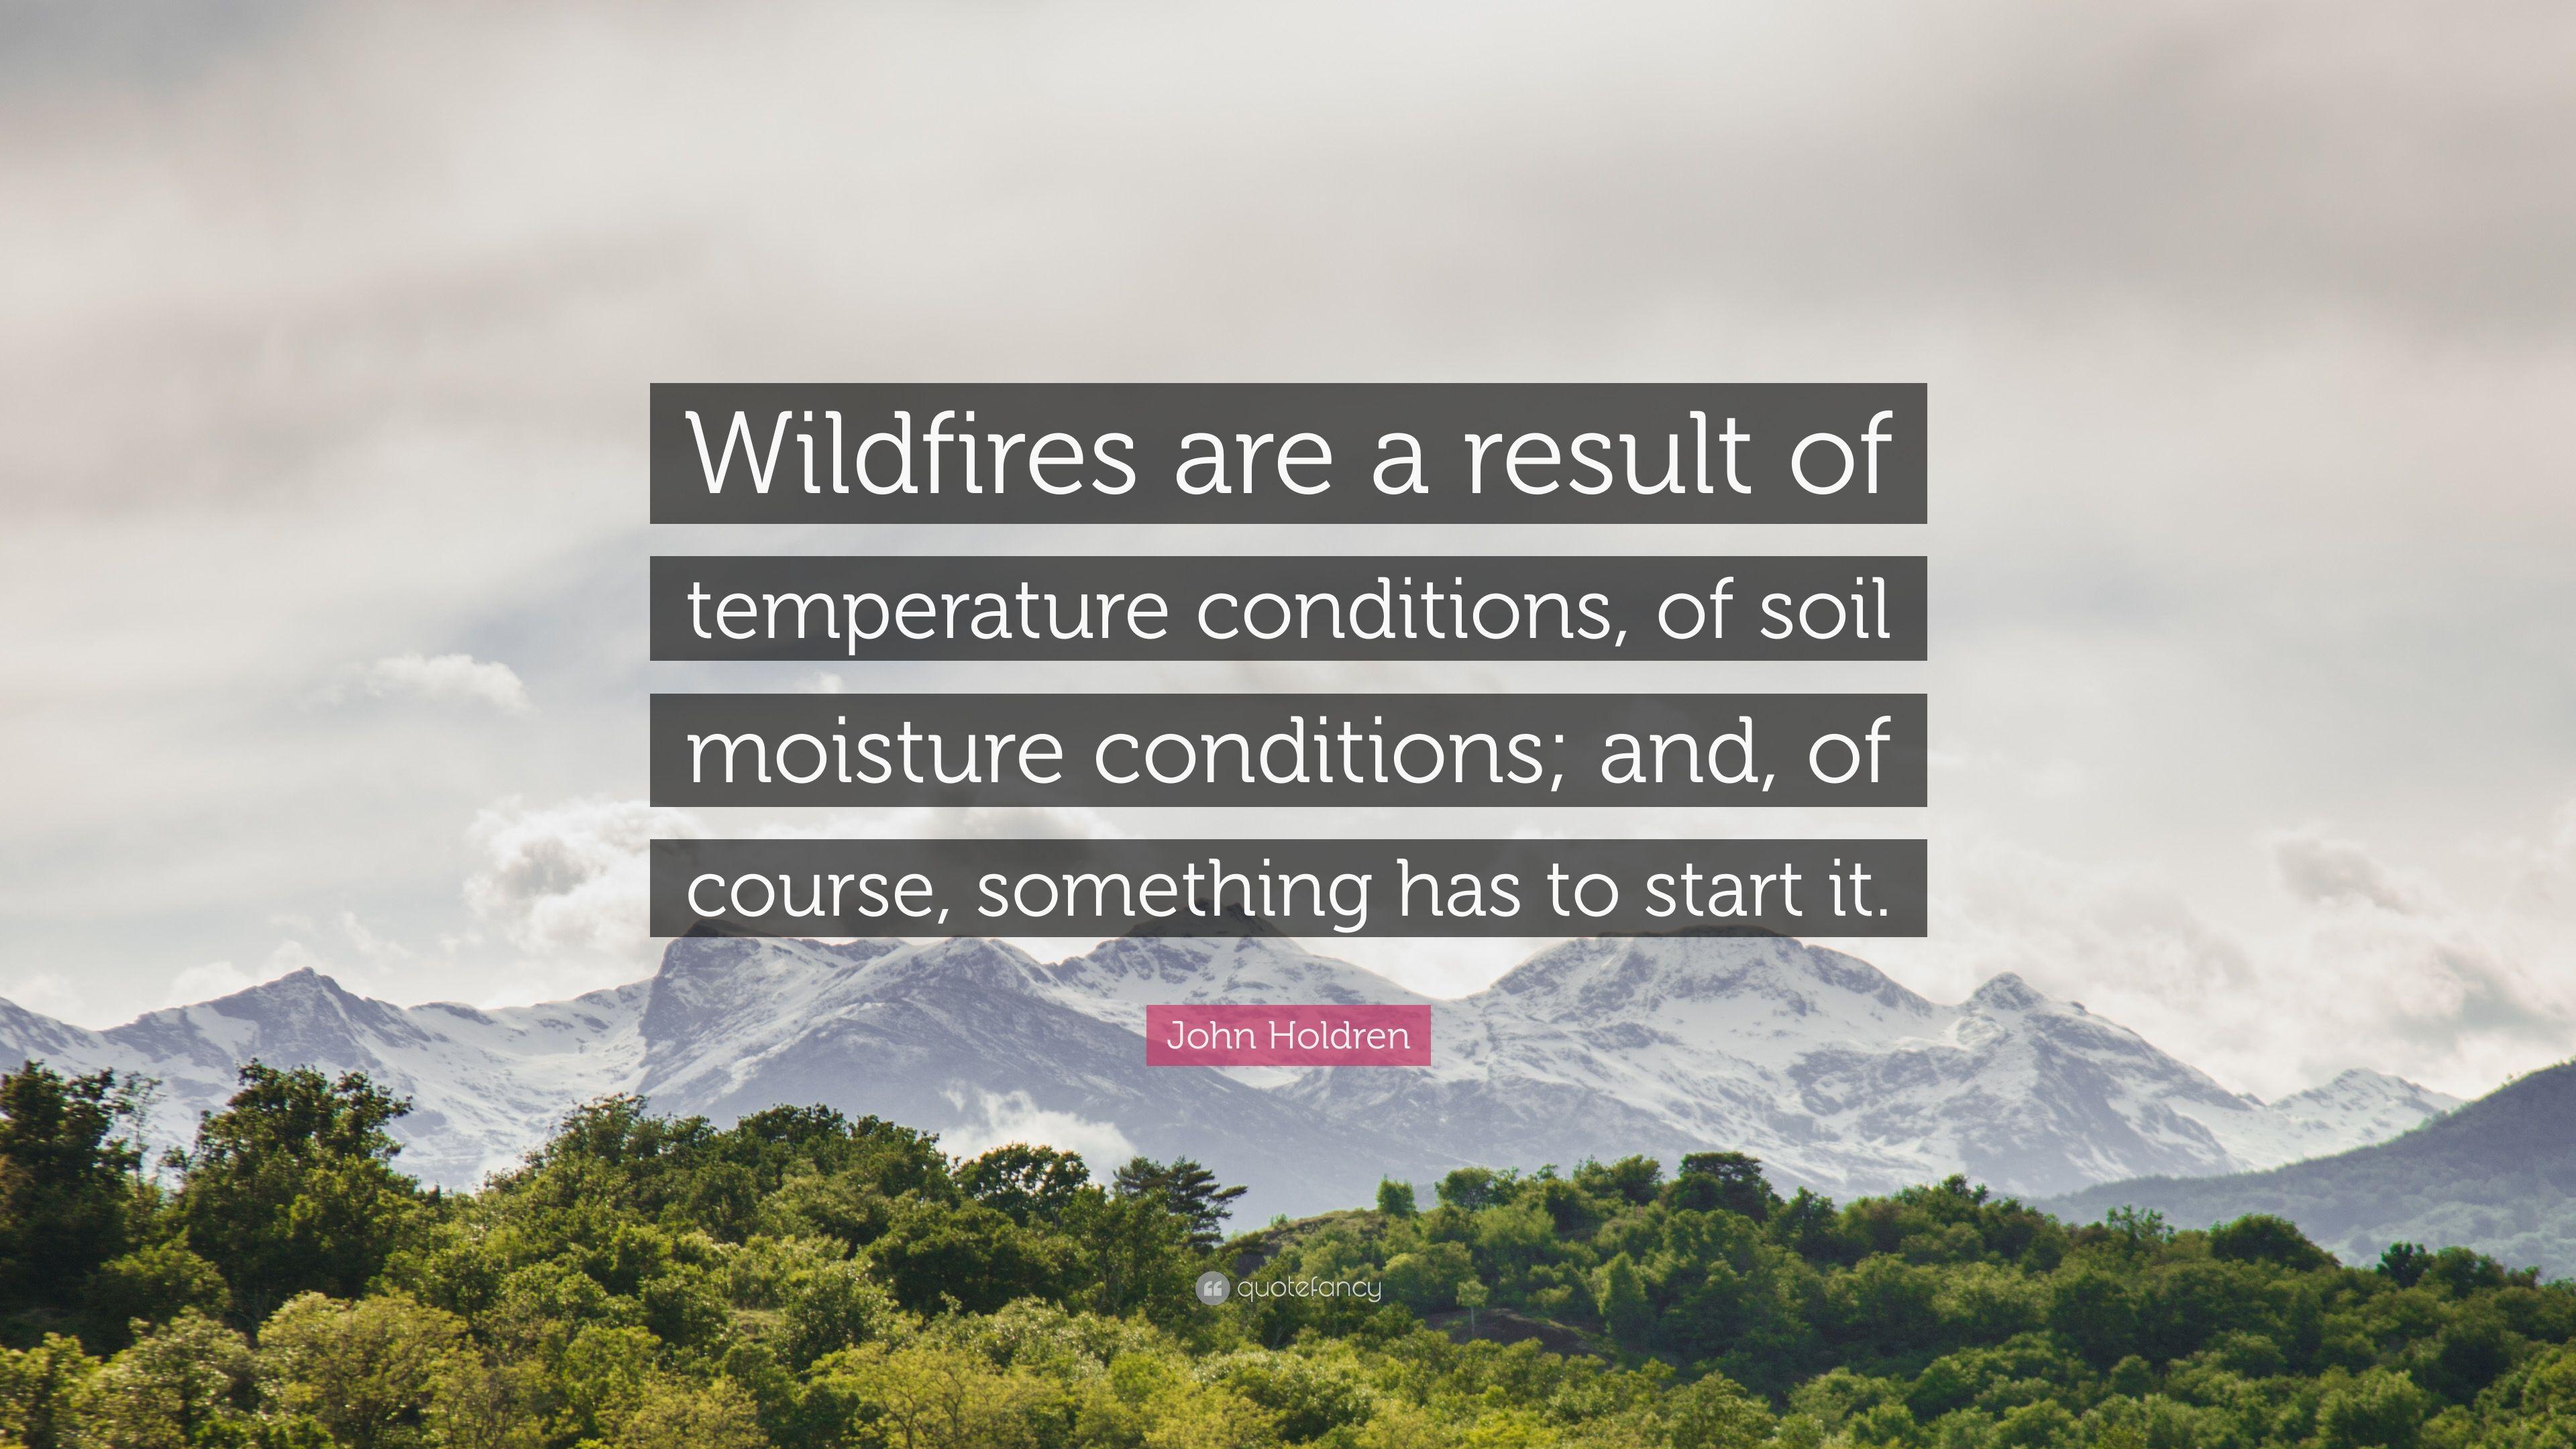 John Holdren Quote: “Wildfires are a result of temperature